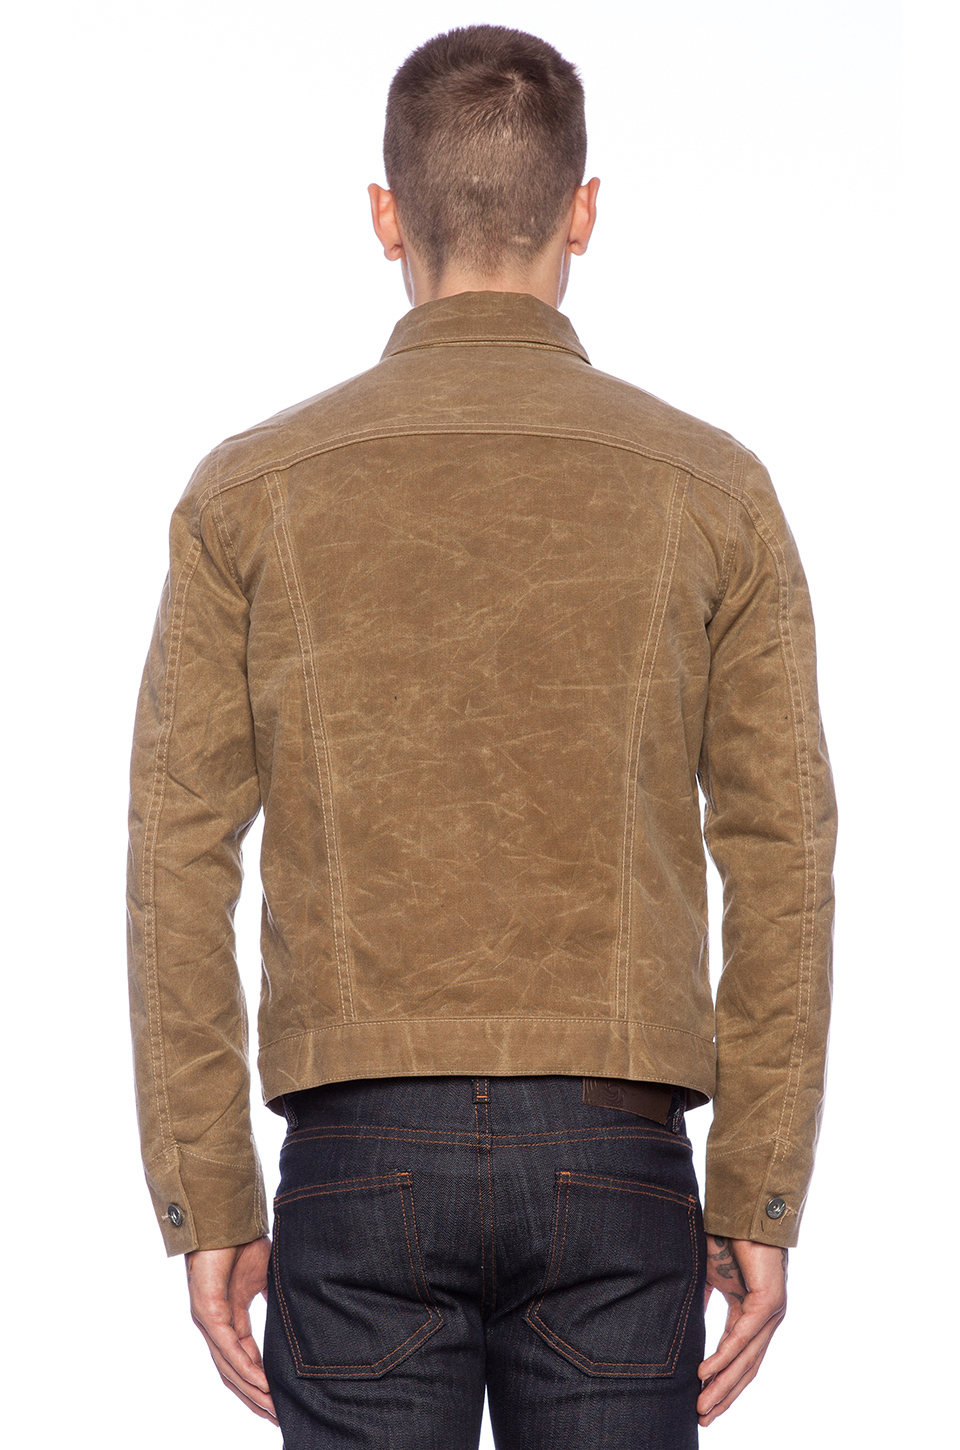 Lyst - Rogue Territory Supply Waxed Canvas Supply Jacket in Natural for Men